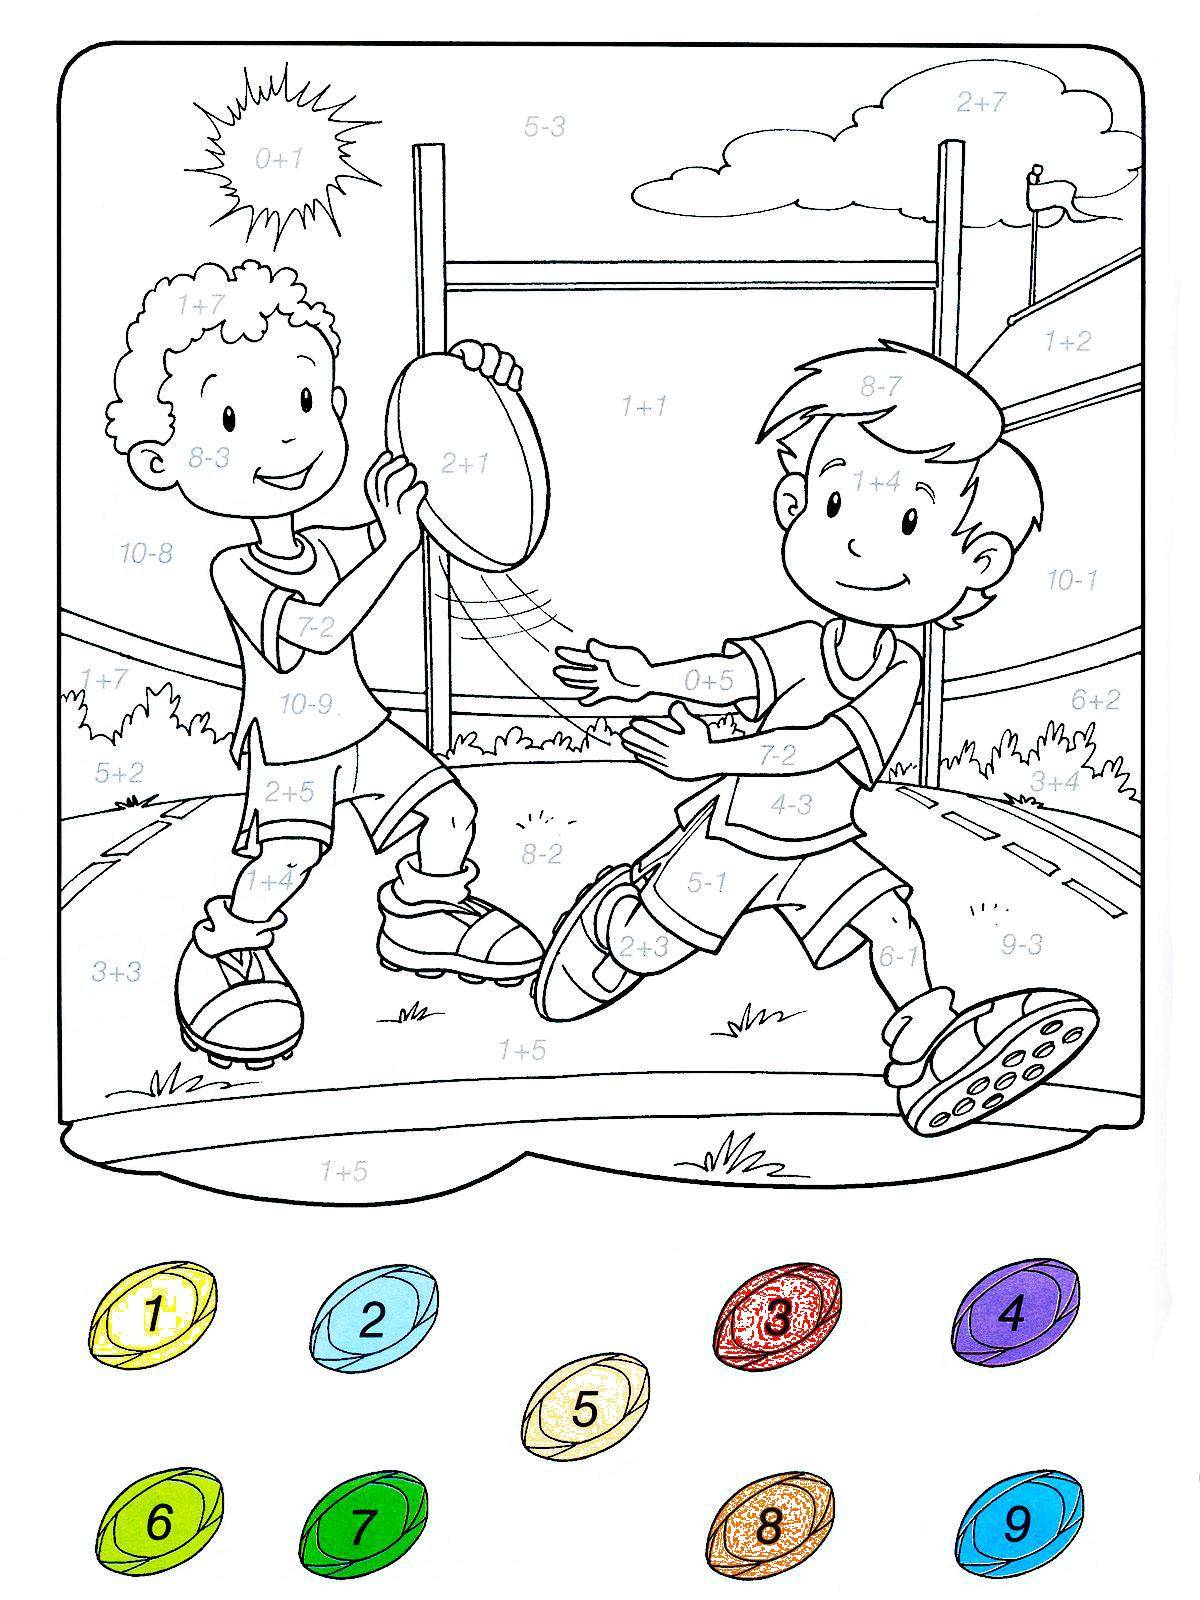 Coloring Paint a picture solving examples. Category mathematical coloring pages. Tags:  sports, boys, children, examples.